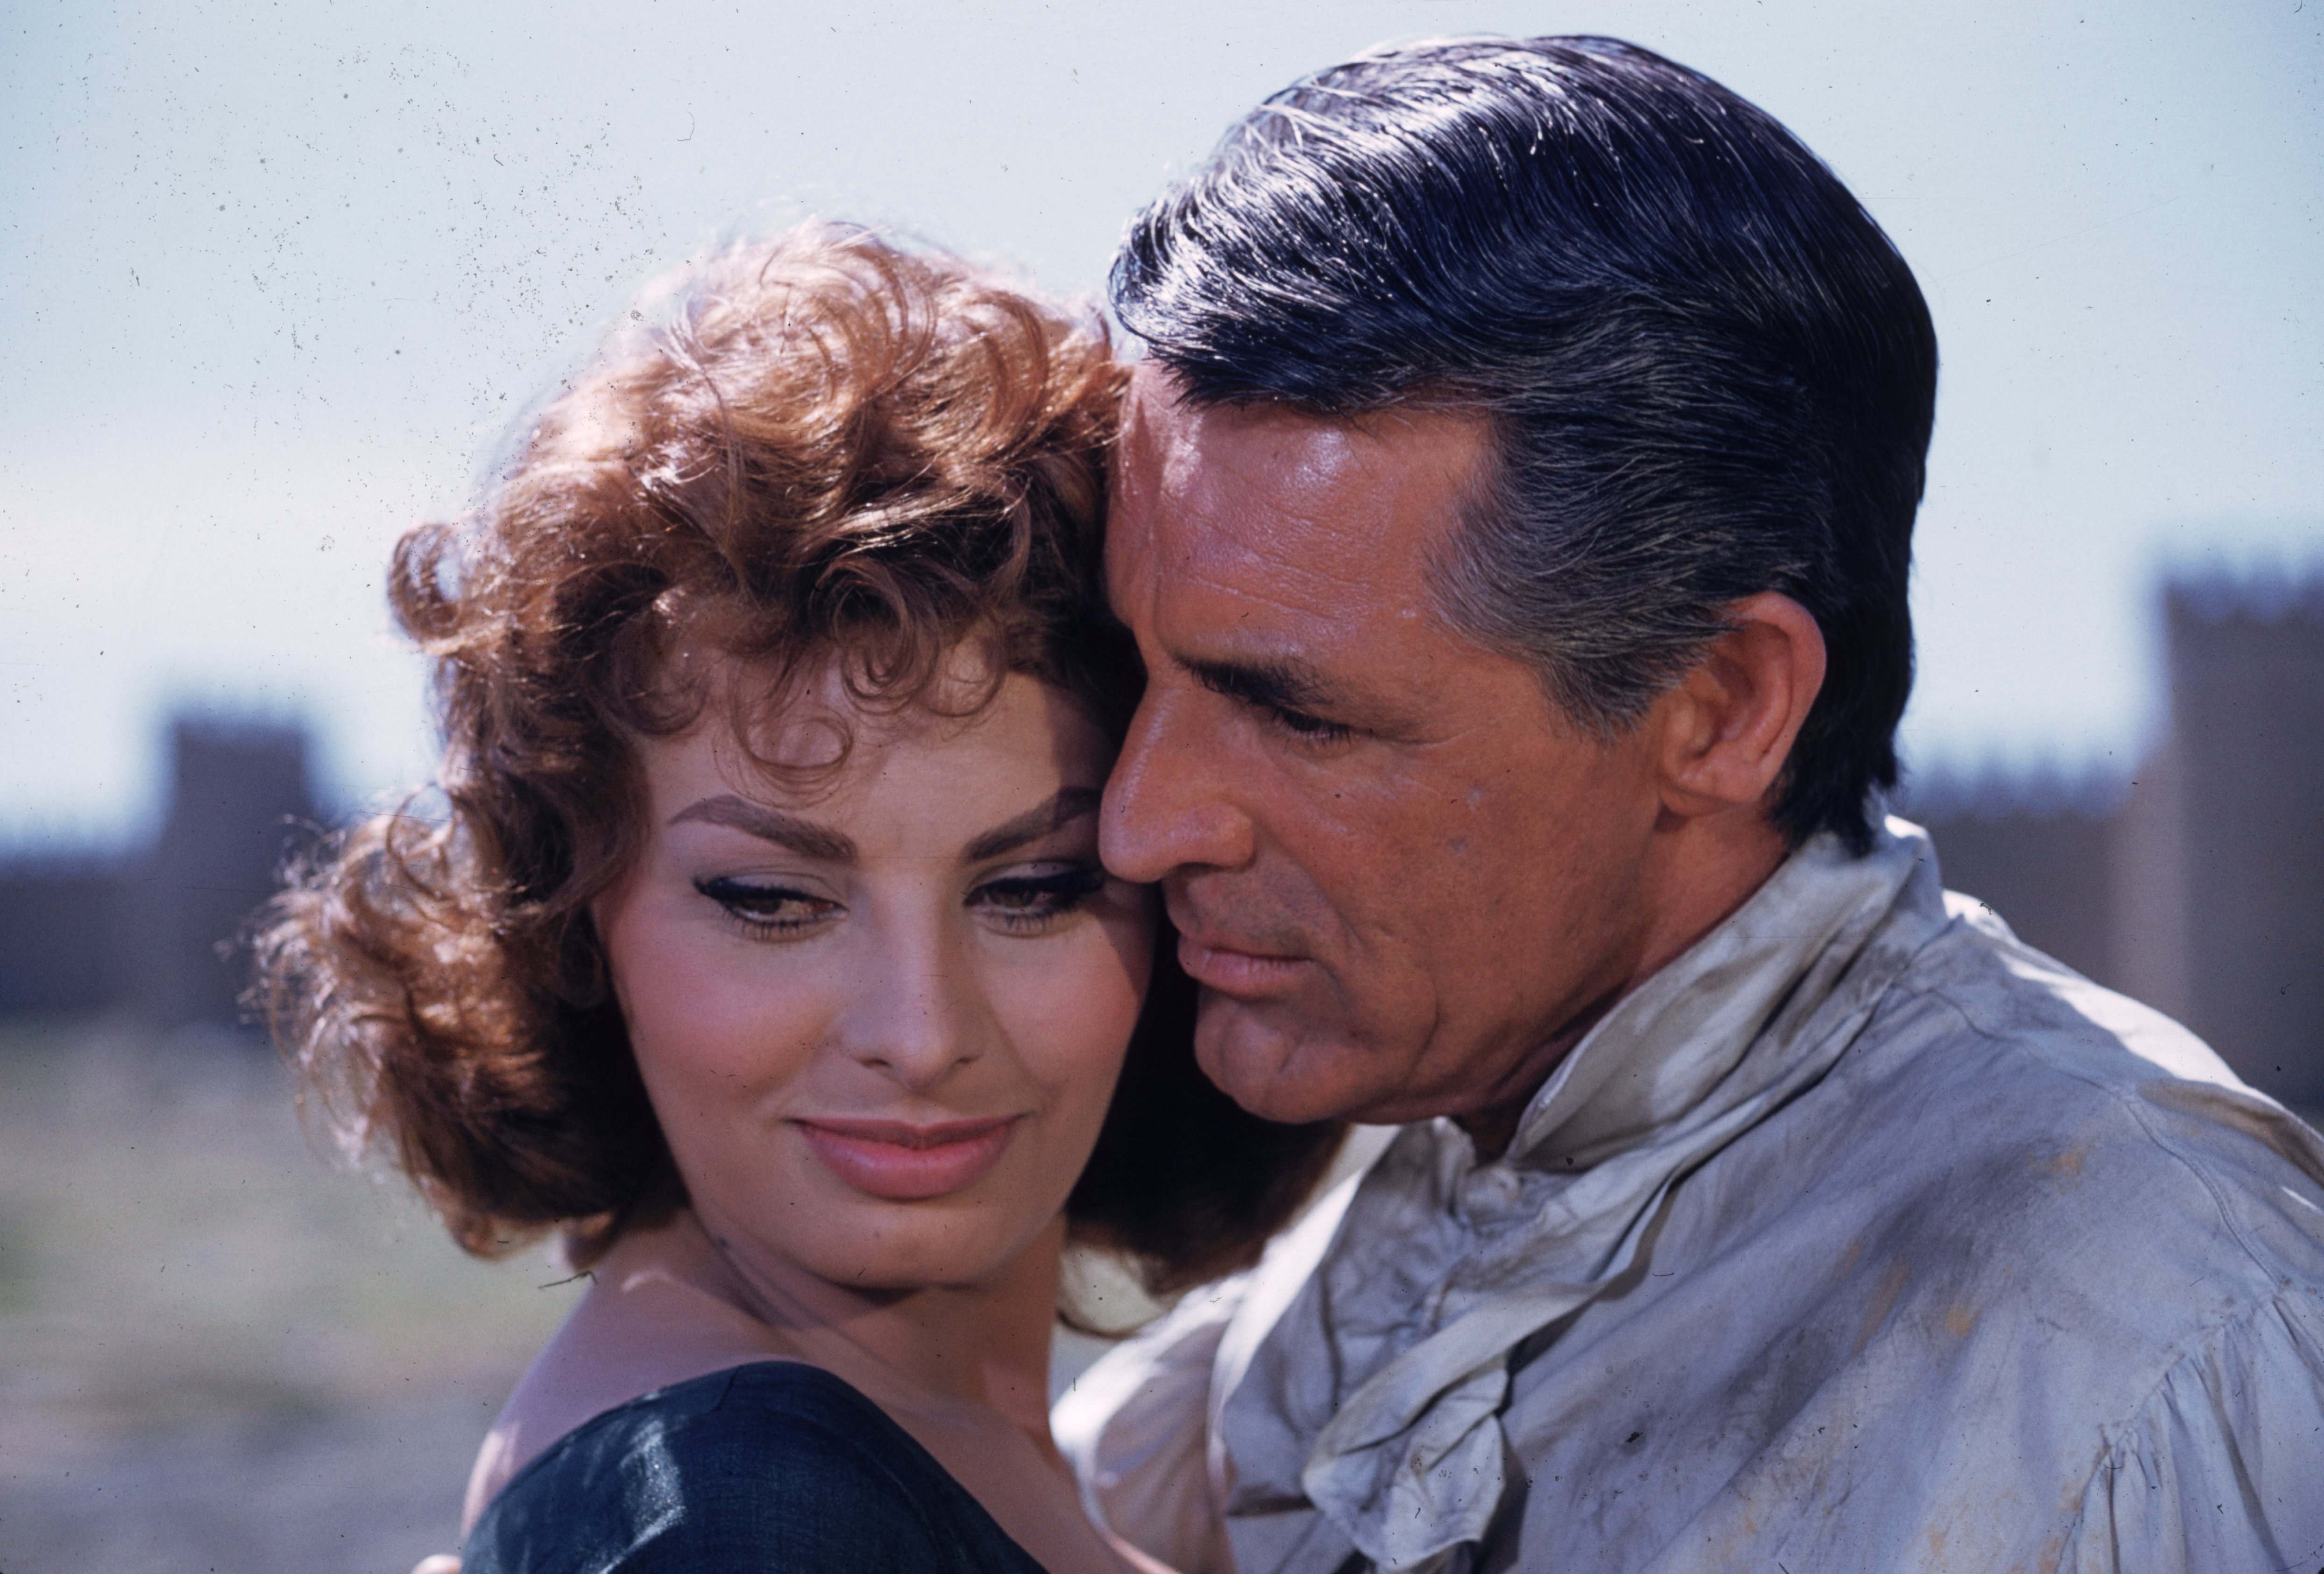 Sophia Loren spielt mit Cary Grant in der United Artists-Produktion von "The Pride and The Passion". | Quelle: Getty Images